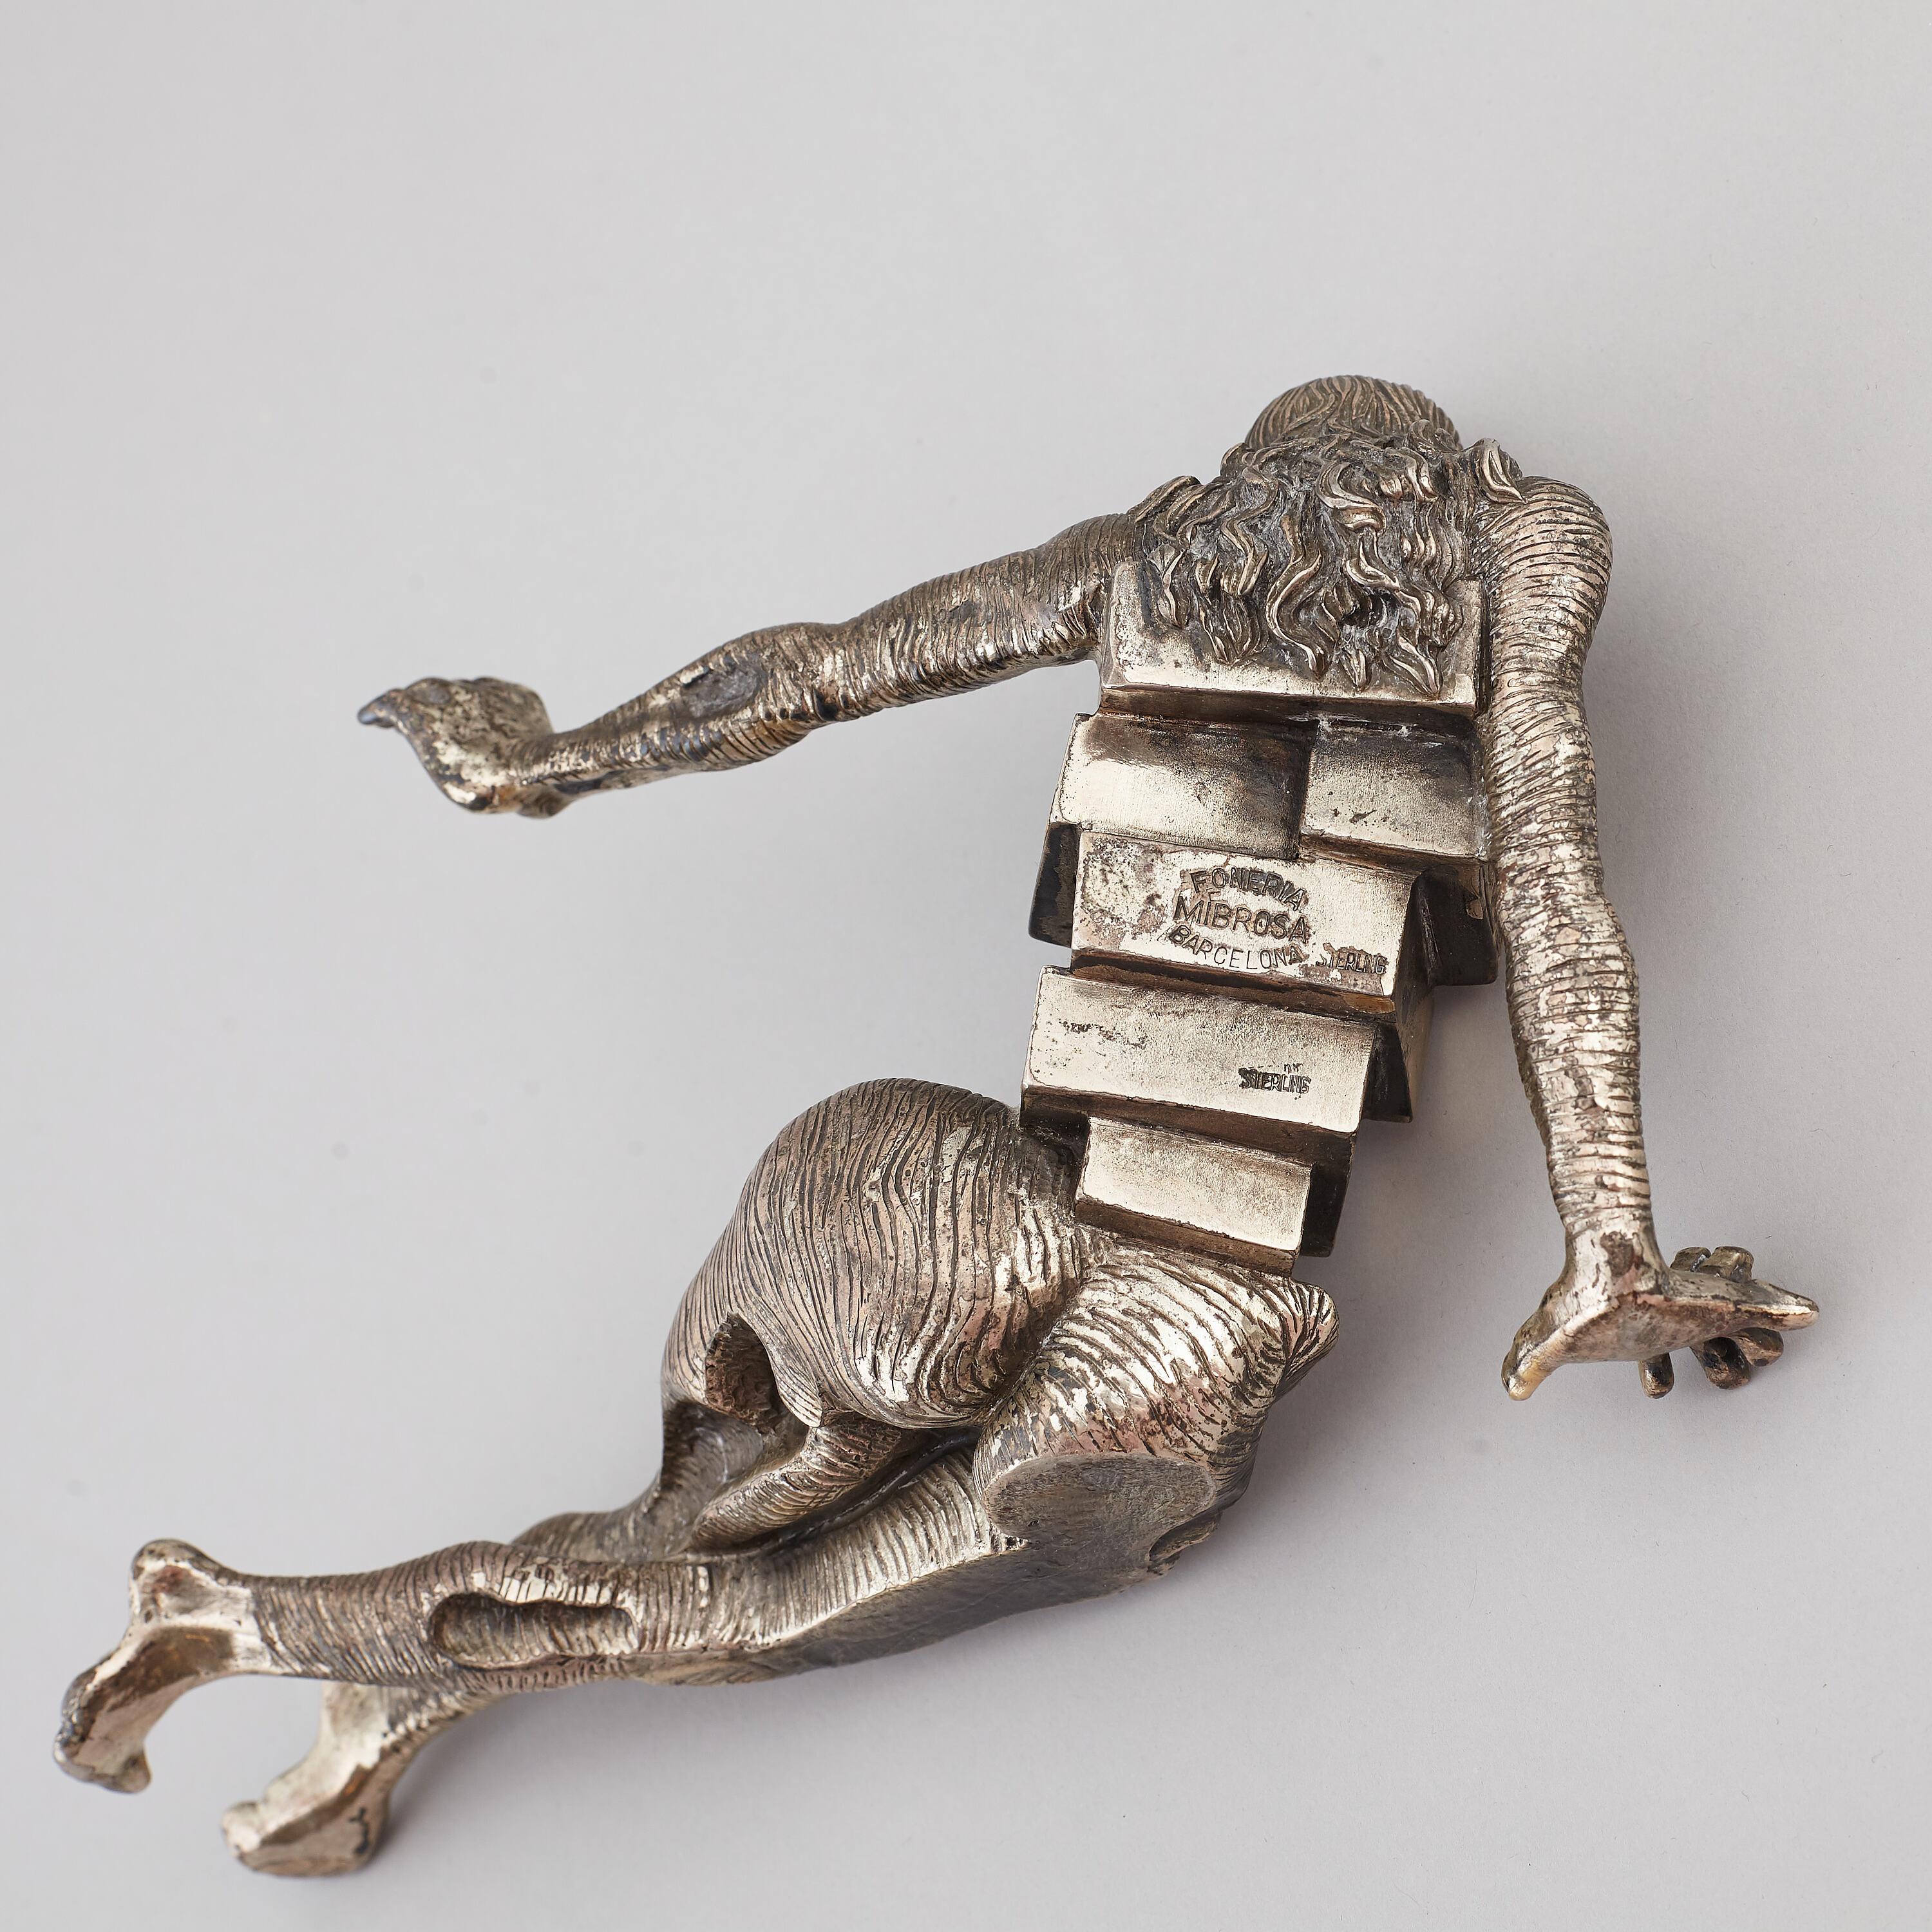 Salvador Dalí
(Spain, 1904-1989)
Le cabinet Anthropomorphique
1982, signed Dali 057/330-A.
Foundry marks Foneria Mirbosa, Barcelona. Silver sculpture. 12 x 23 cm, w. 2102 gr.

A bronze sculpture representing a woman lying down, head down, arm